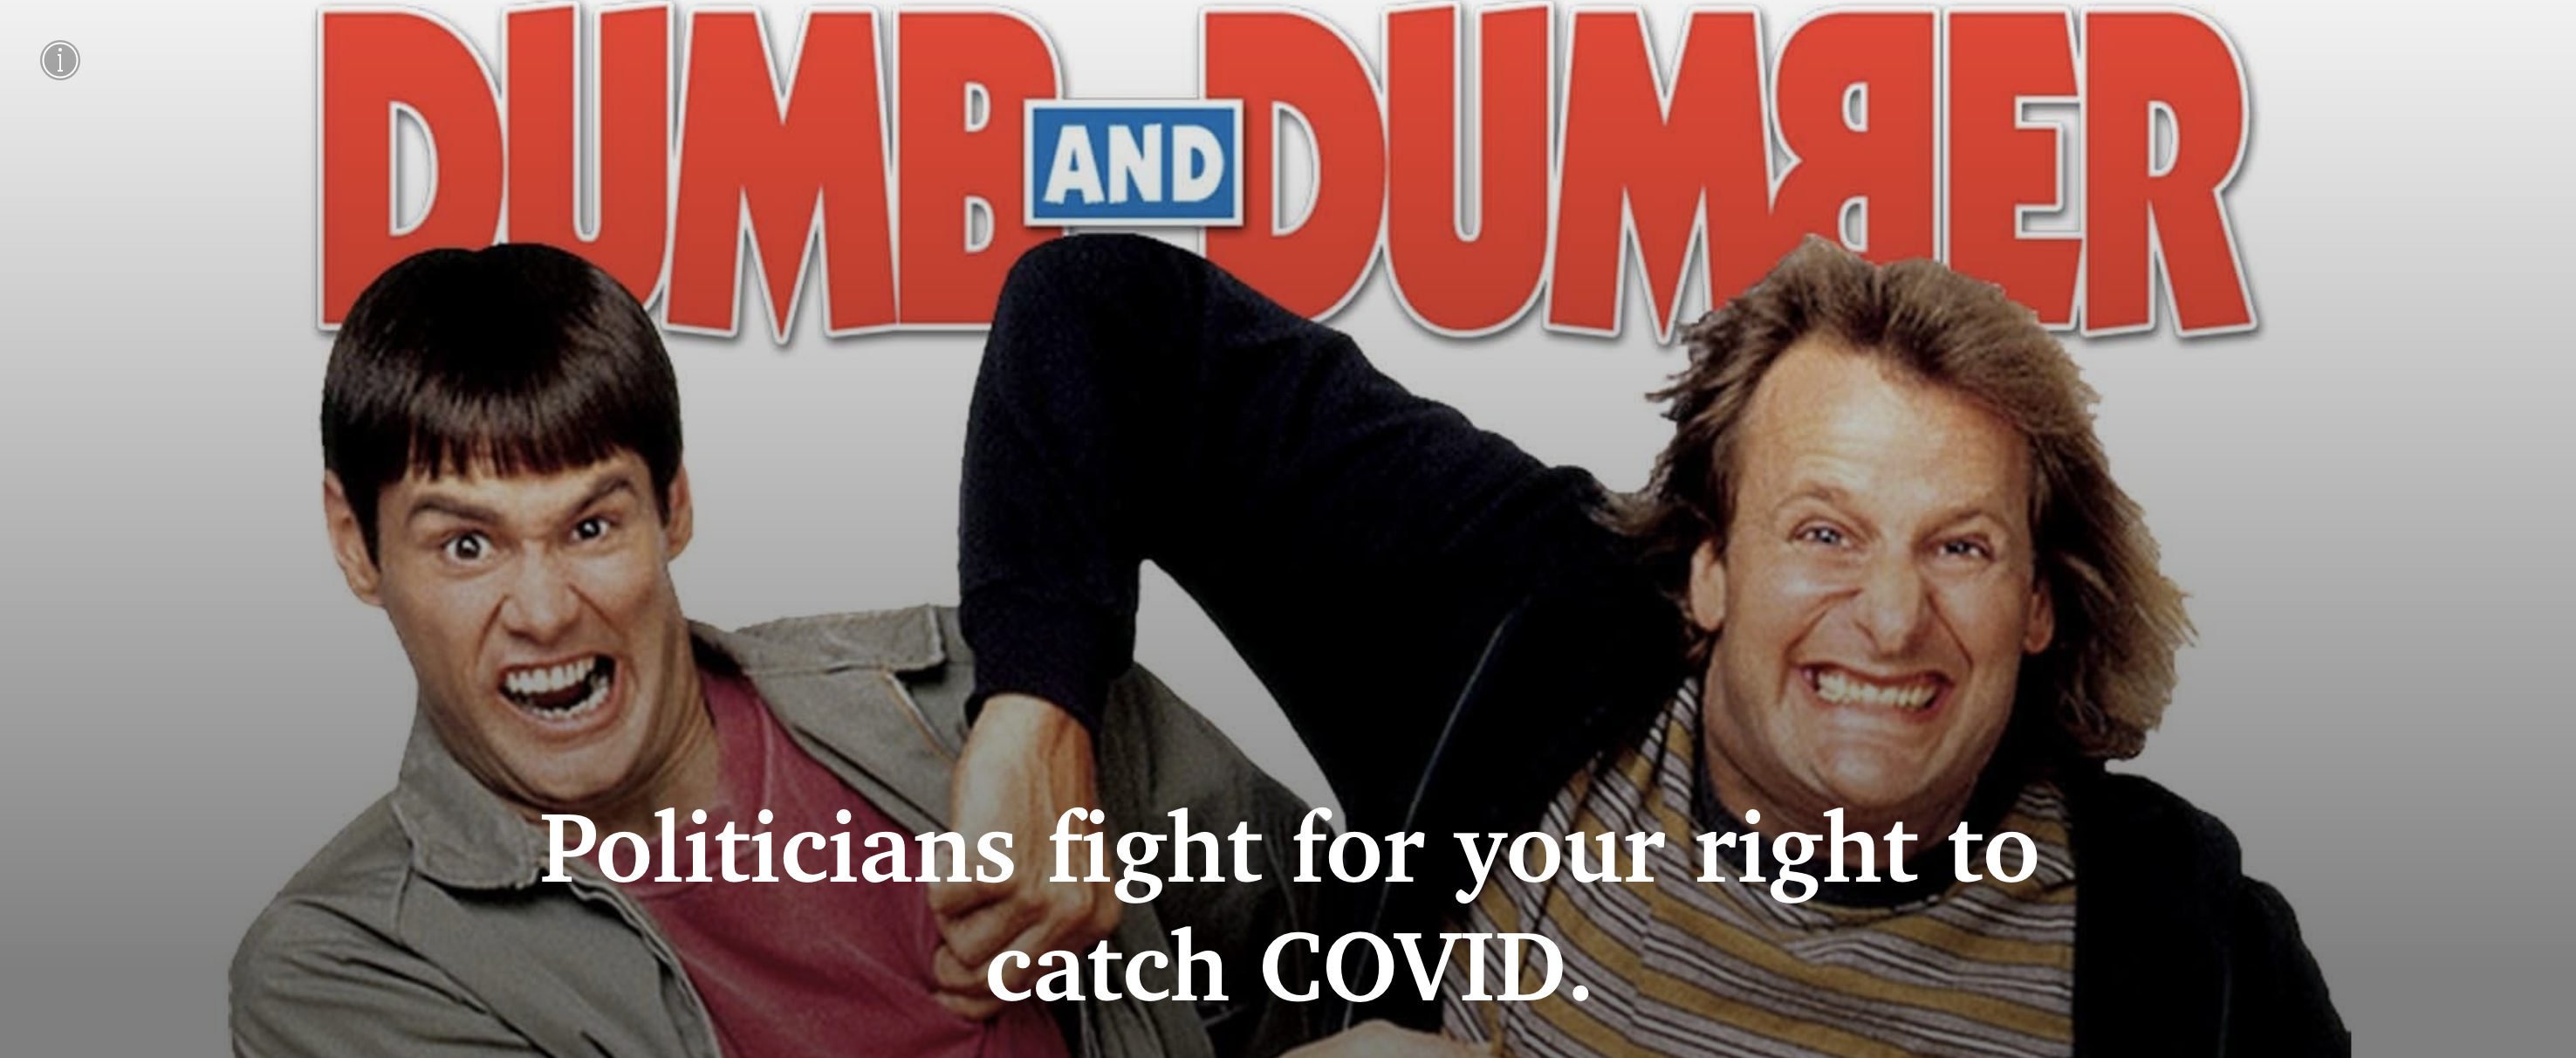 Dumb & dumber. Politicians fight for your right to catch COVID.